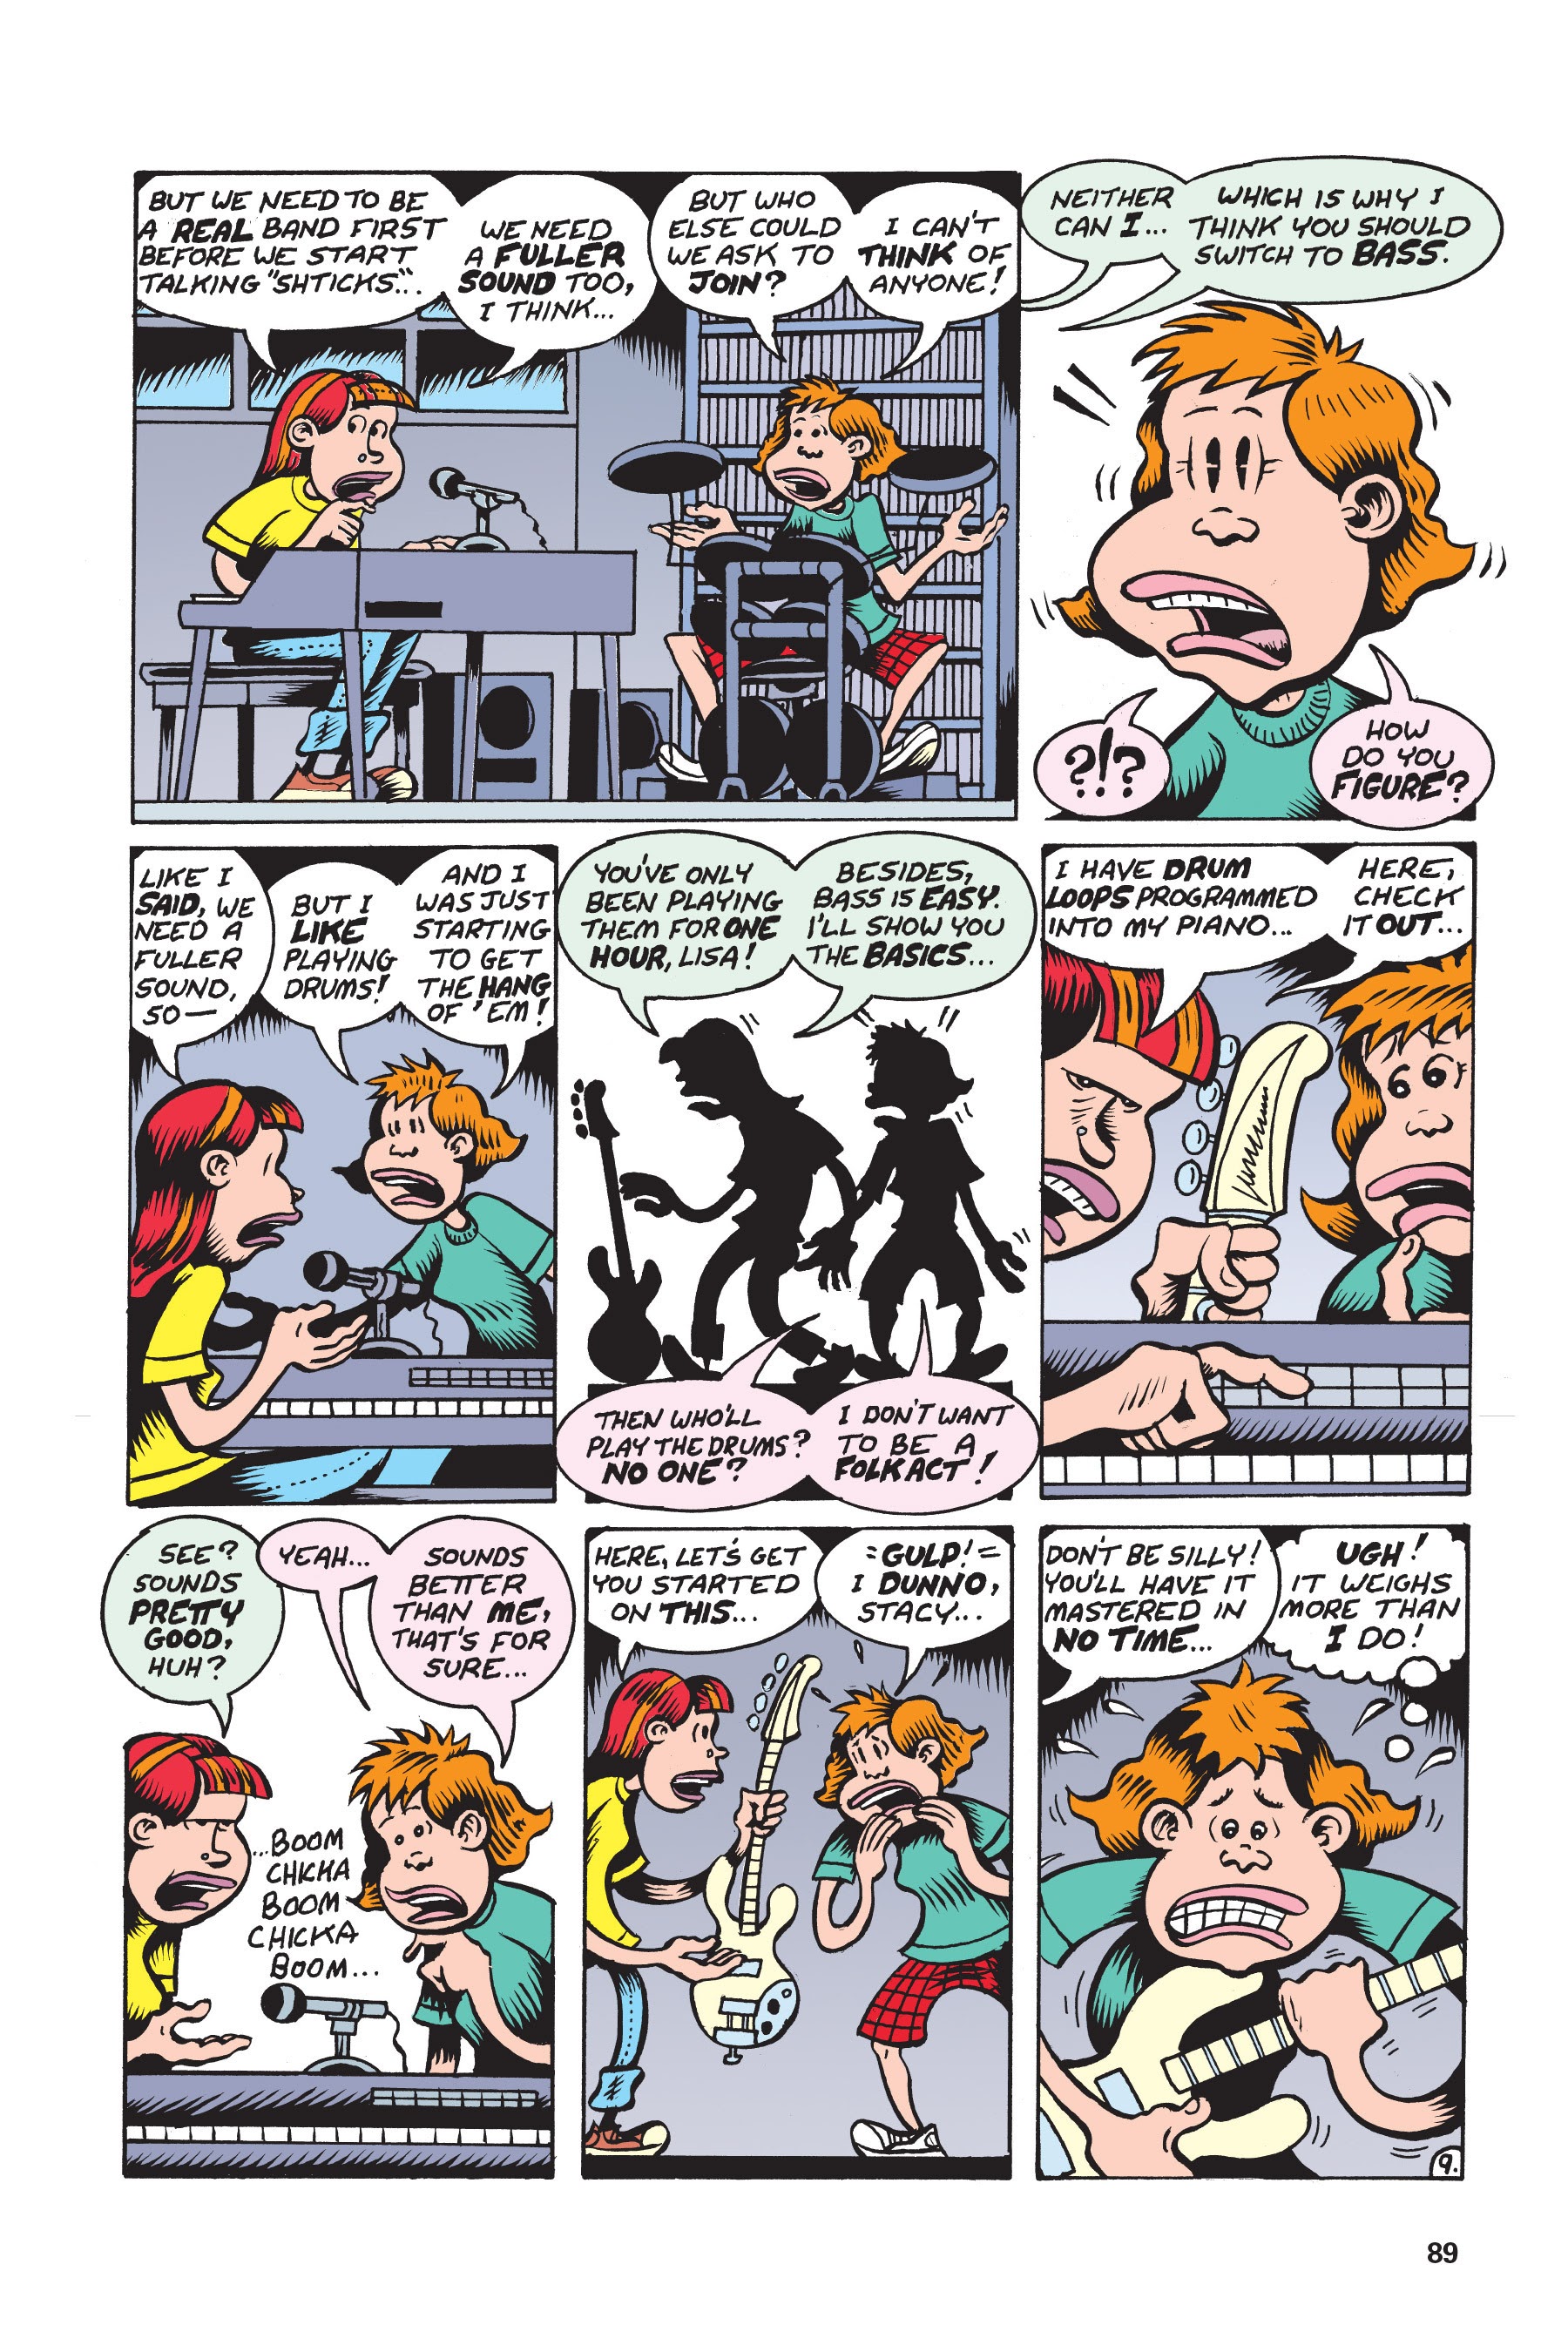 Read online Buddy Buys a Dump comic -  Issue # TPB - 89